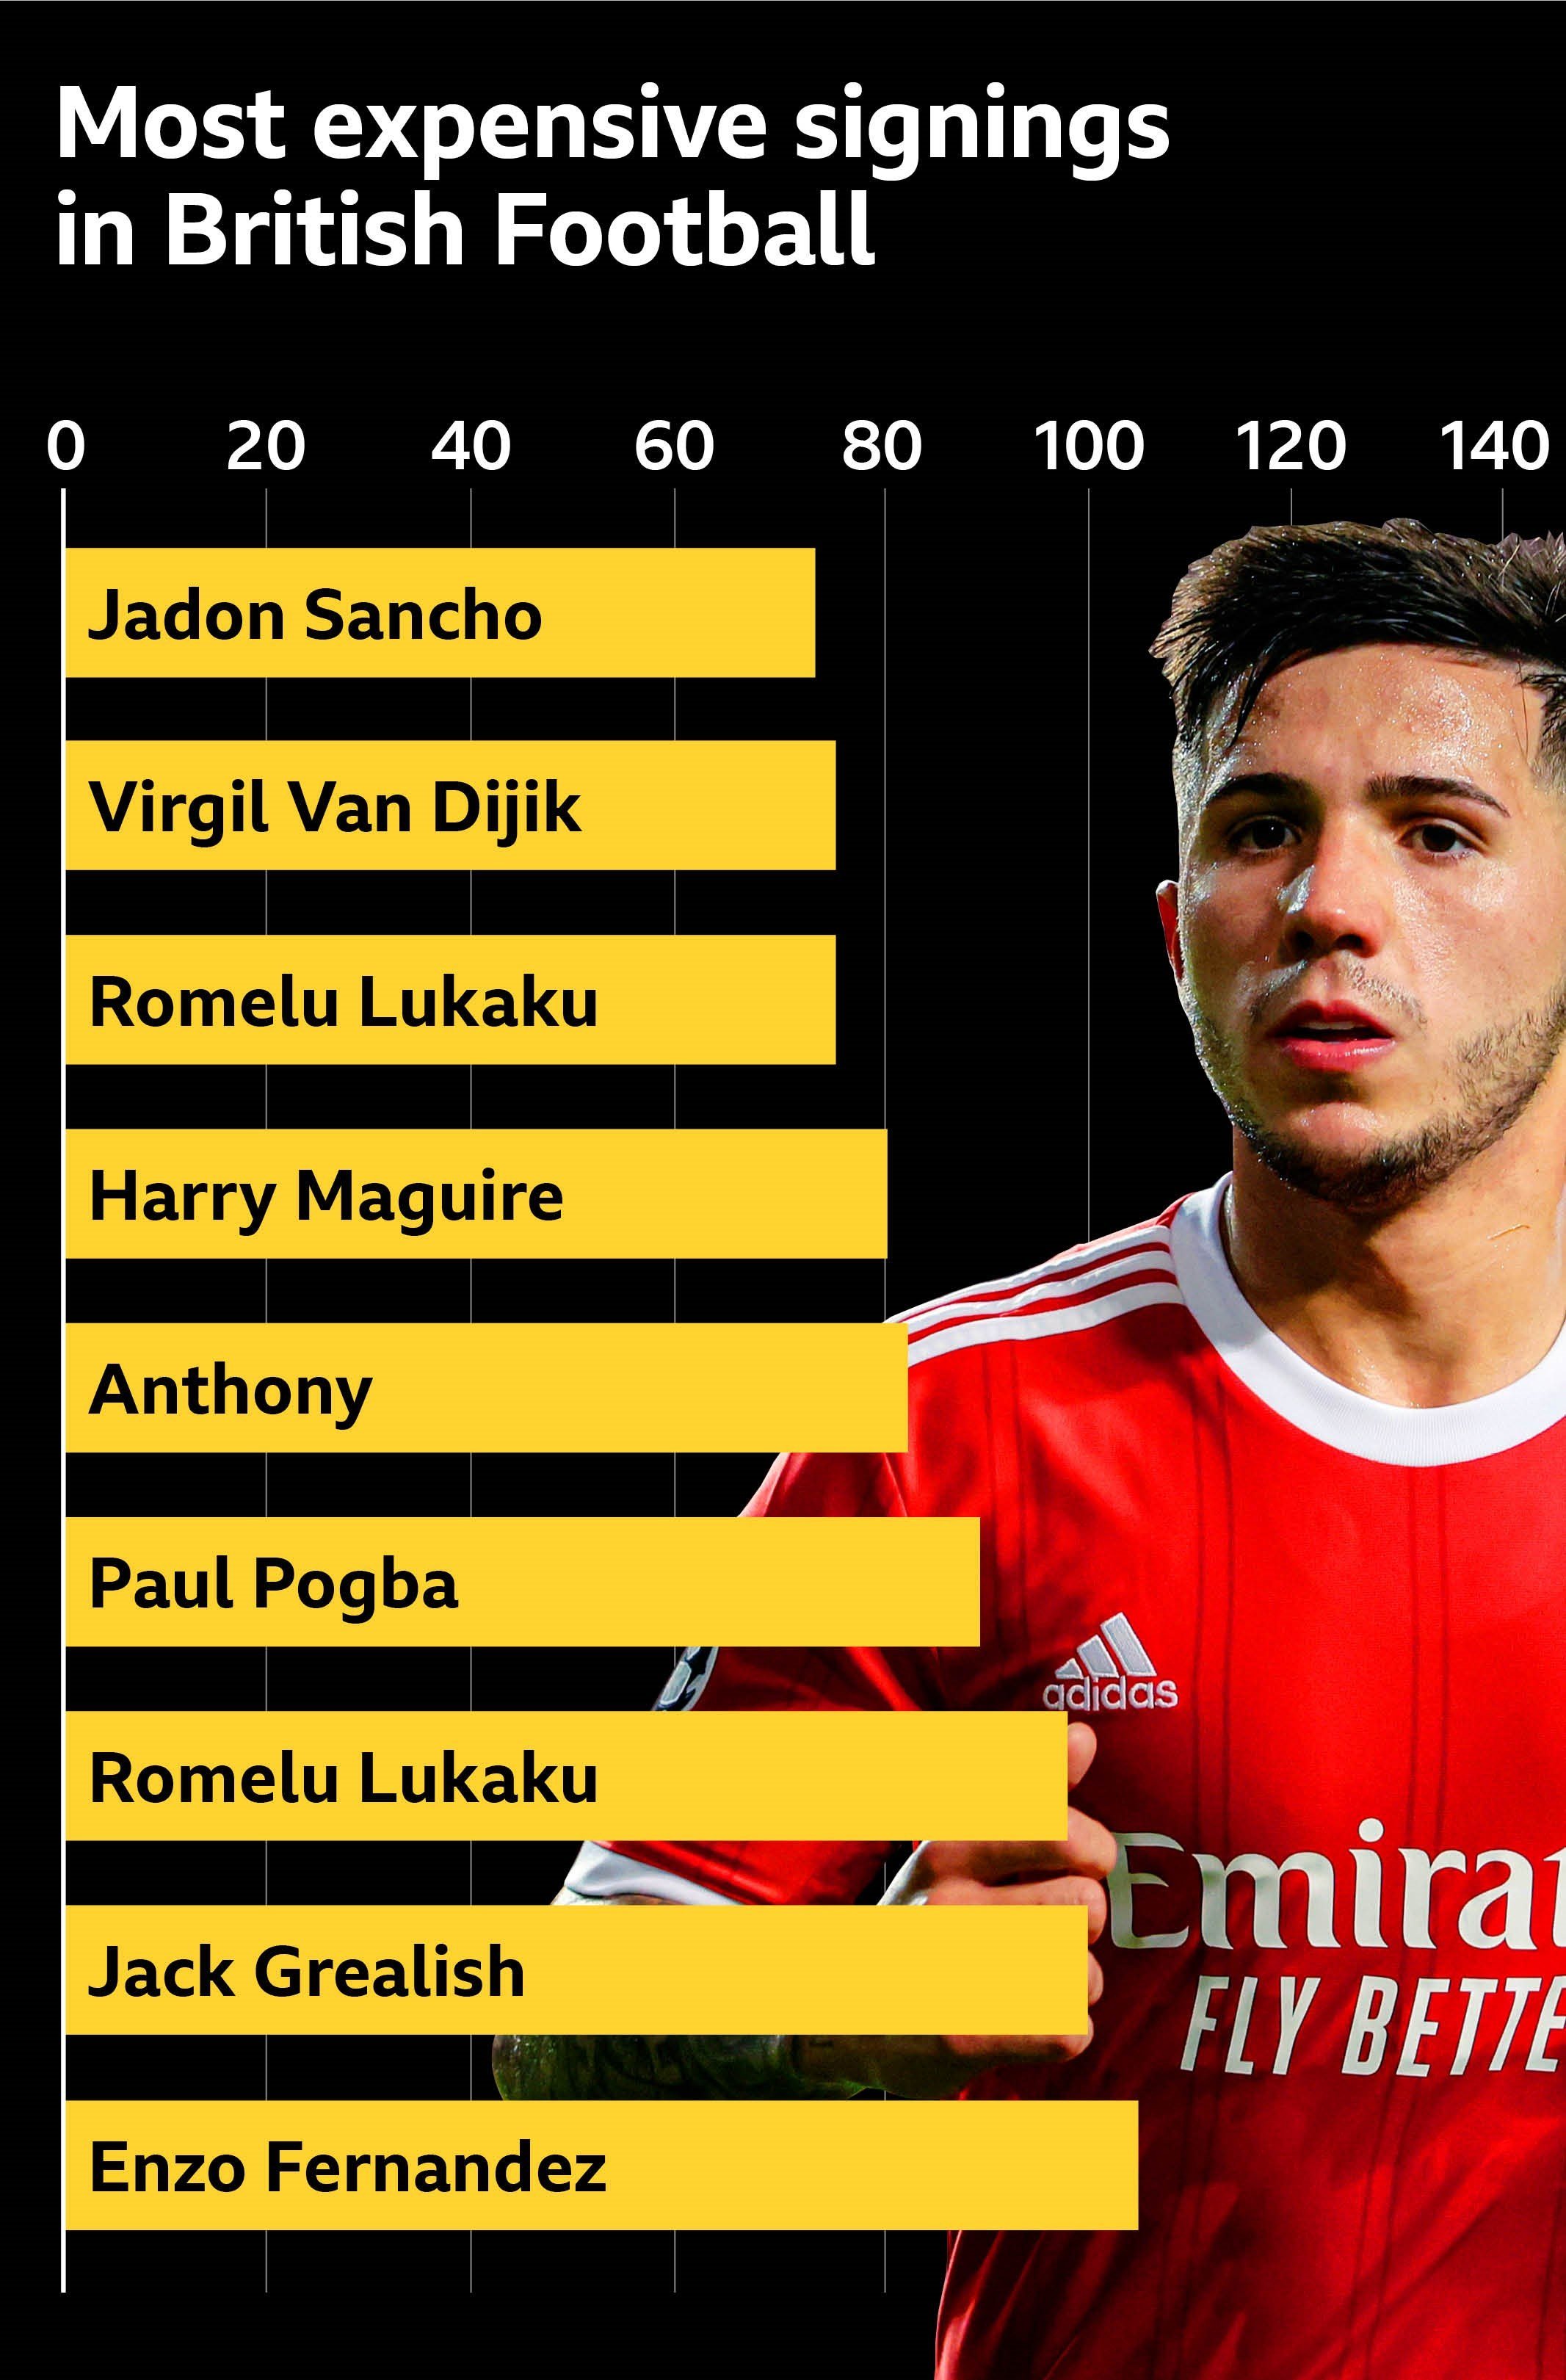 Graphic showing the most expensive signings in British football